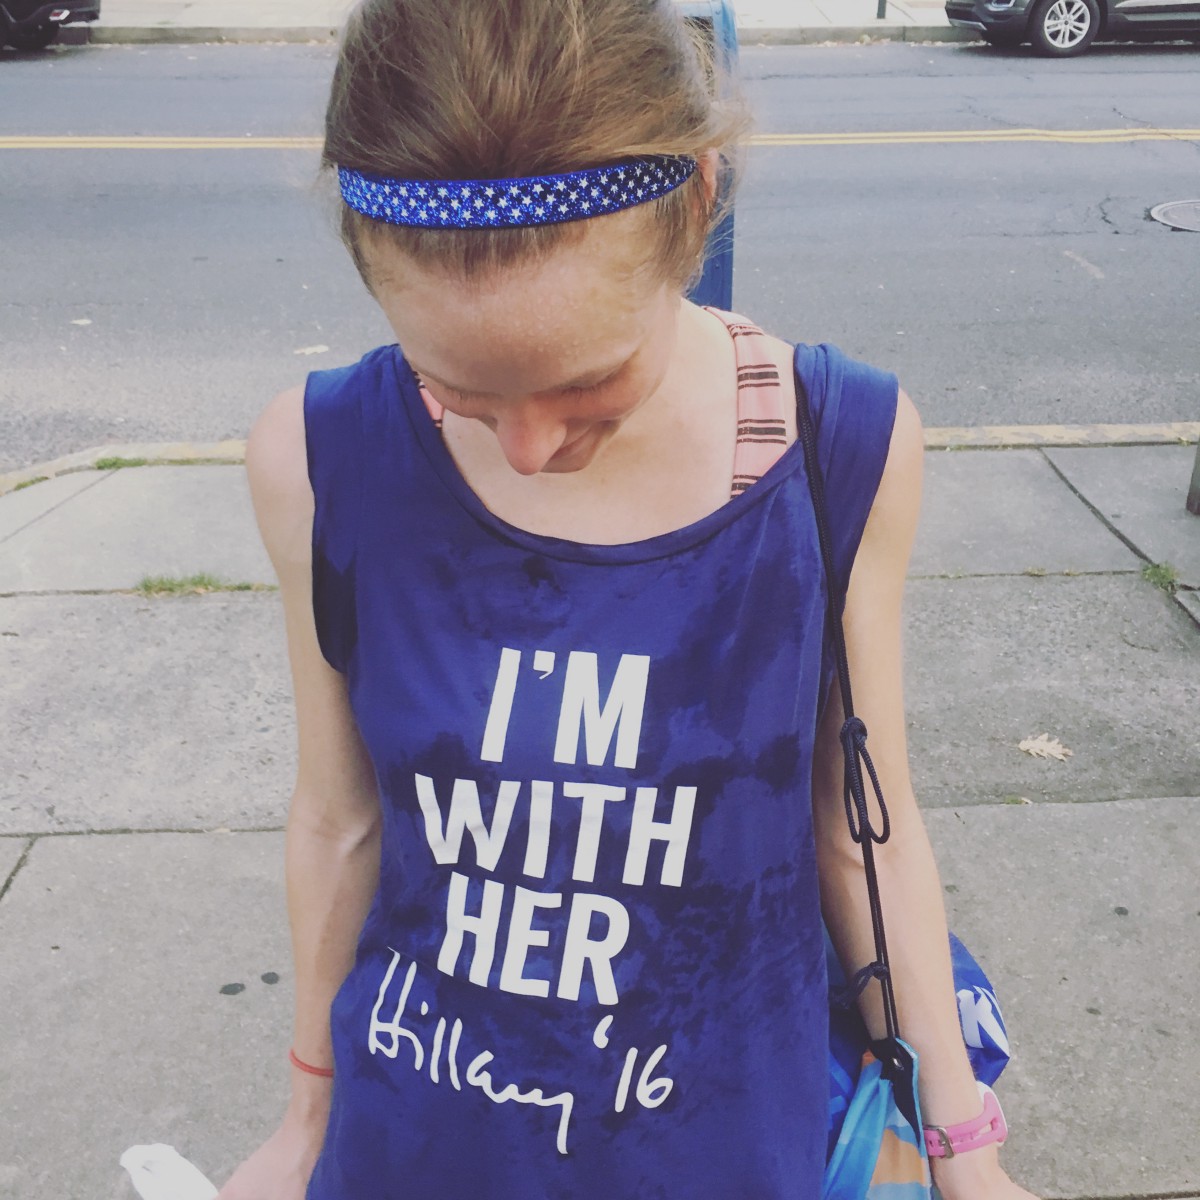 #womenslives: I’m with her (still)